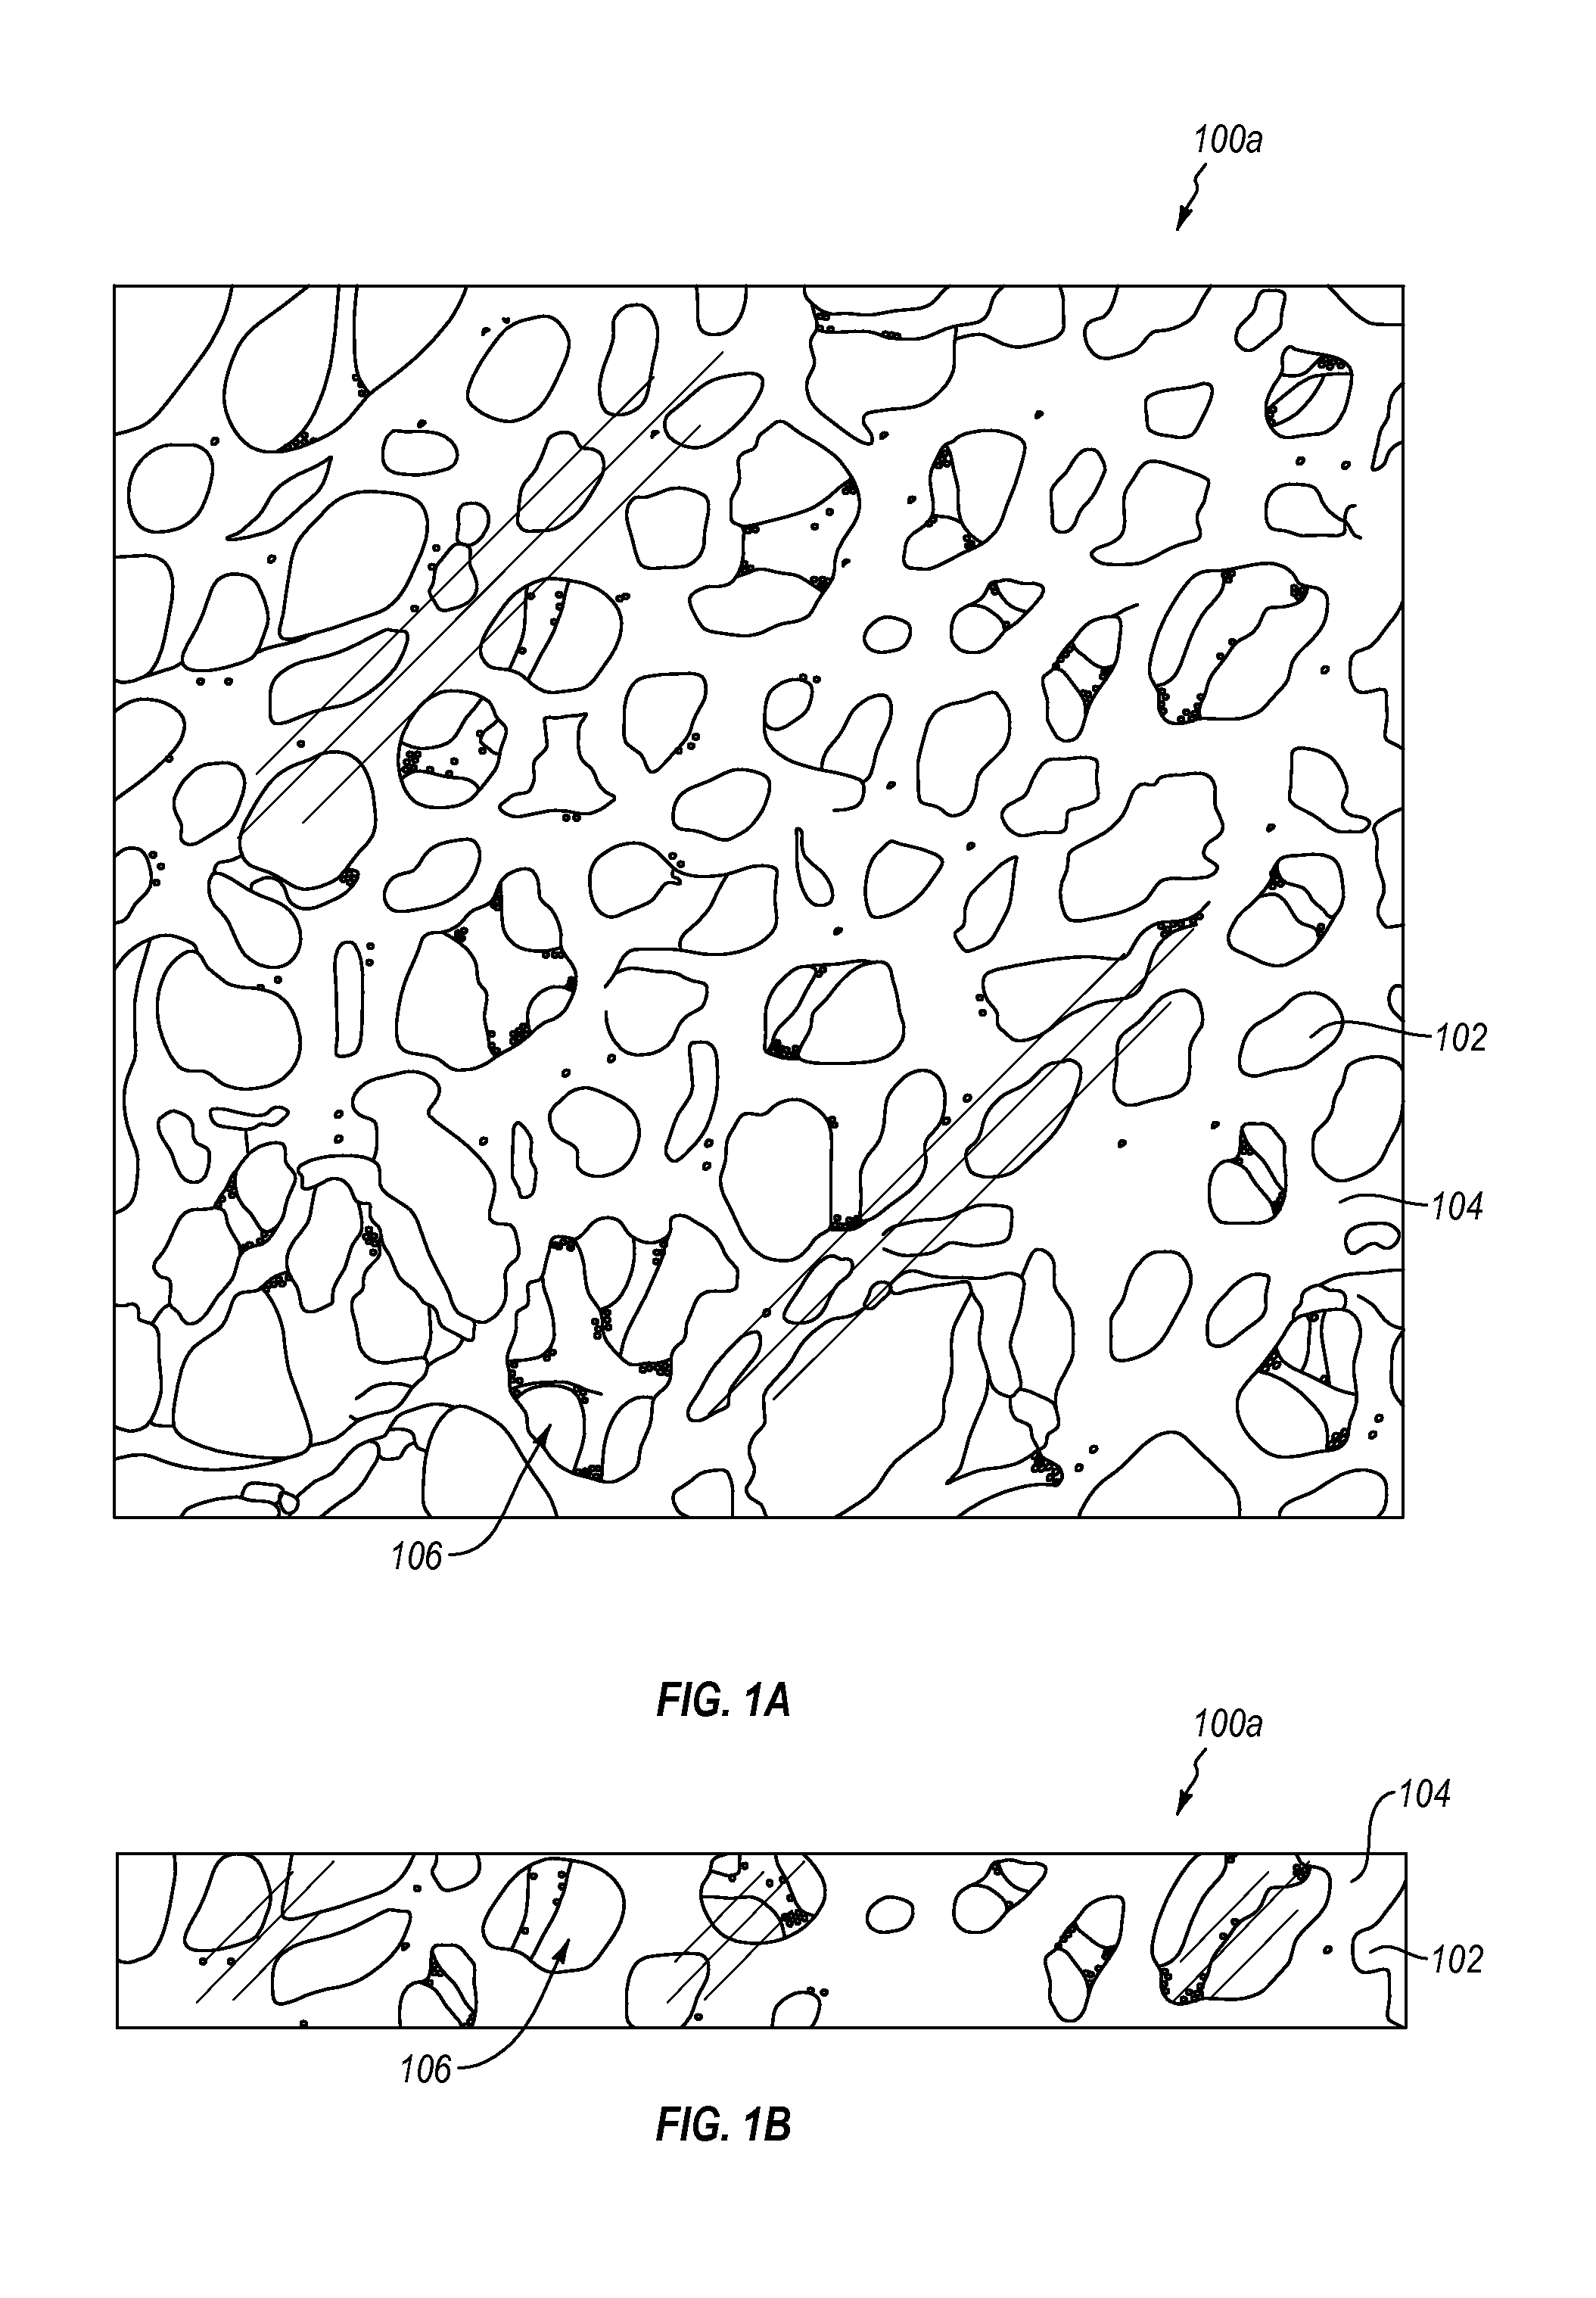 Resin panels with embedded structured-cores and methods of making the same